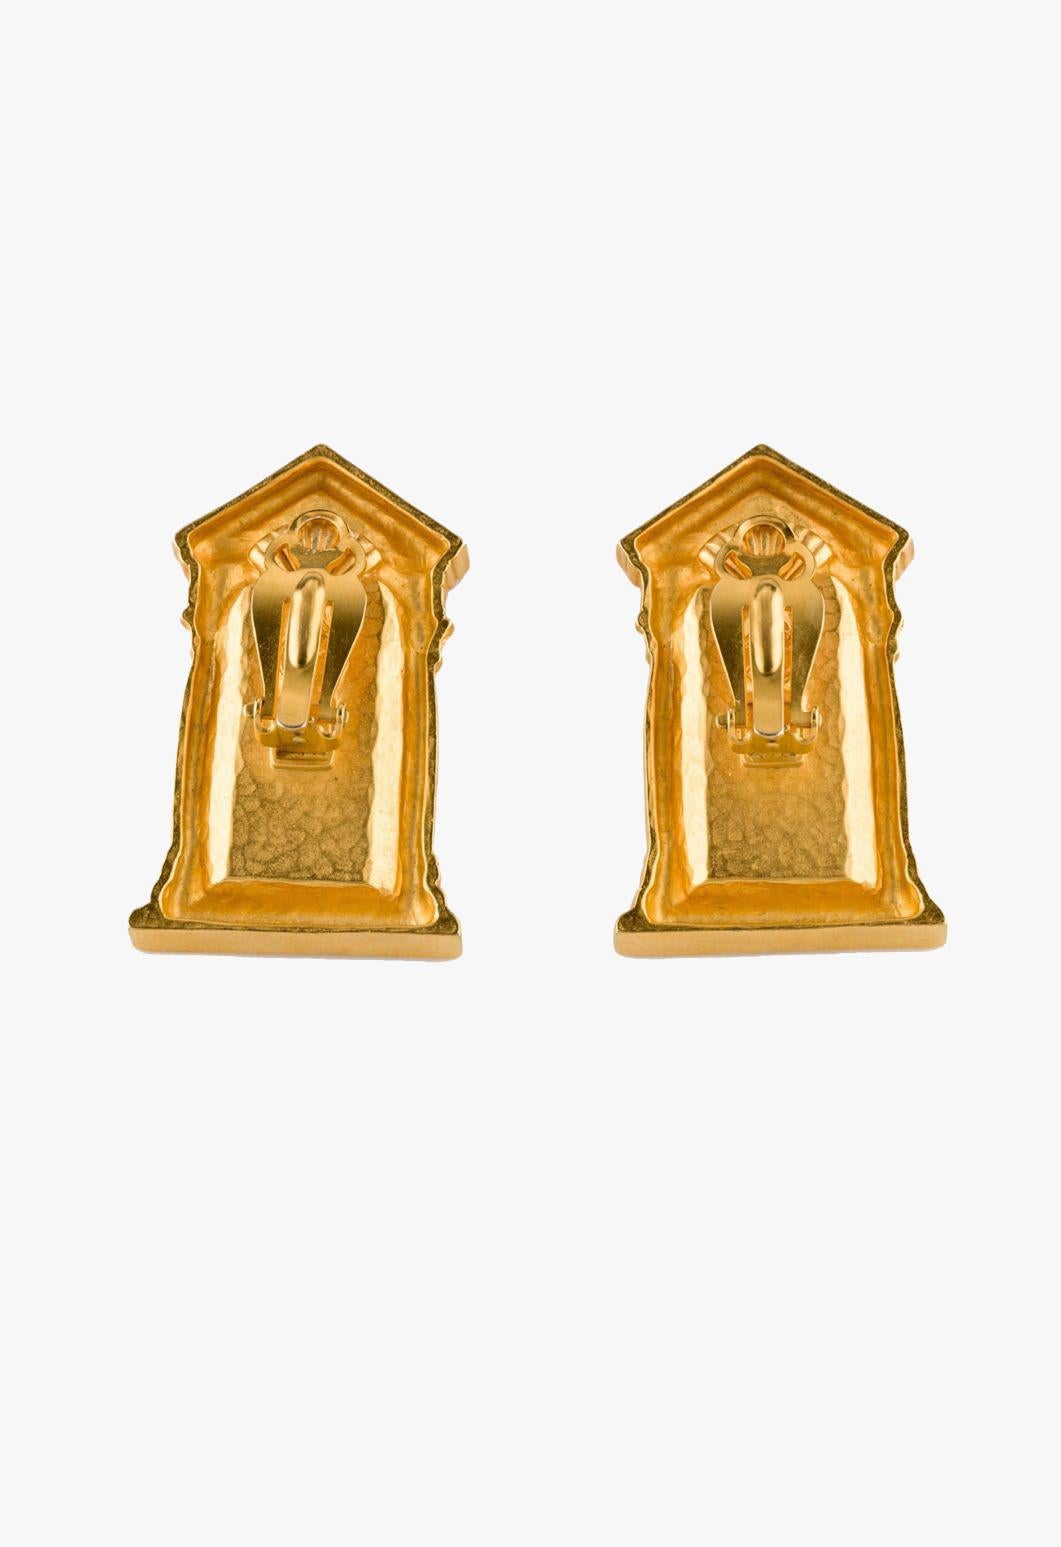 Karl Lagerfeld vintage greek temple door clip-on earrings

Signed – KL

Length – 1,75” / 4,5 cm

Width – 1,25 / 3 cm

Condition – very good

........Additional information ........

- Photo might be slightly different from actual item in terms of